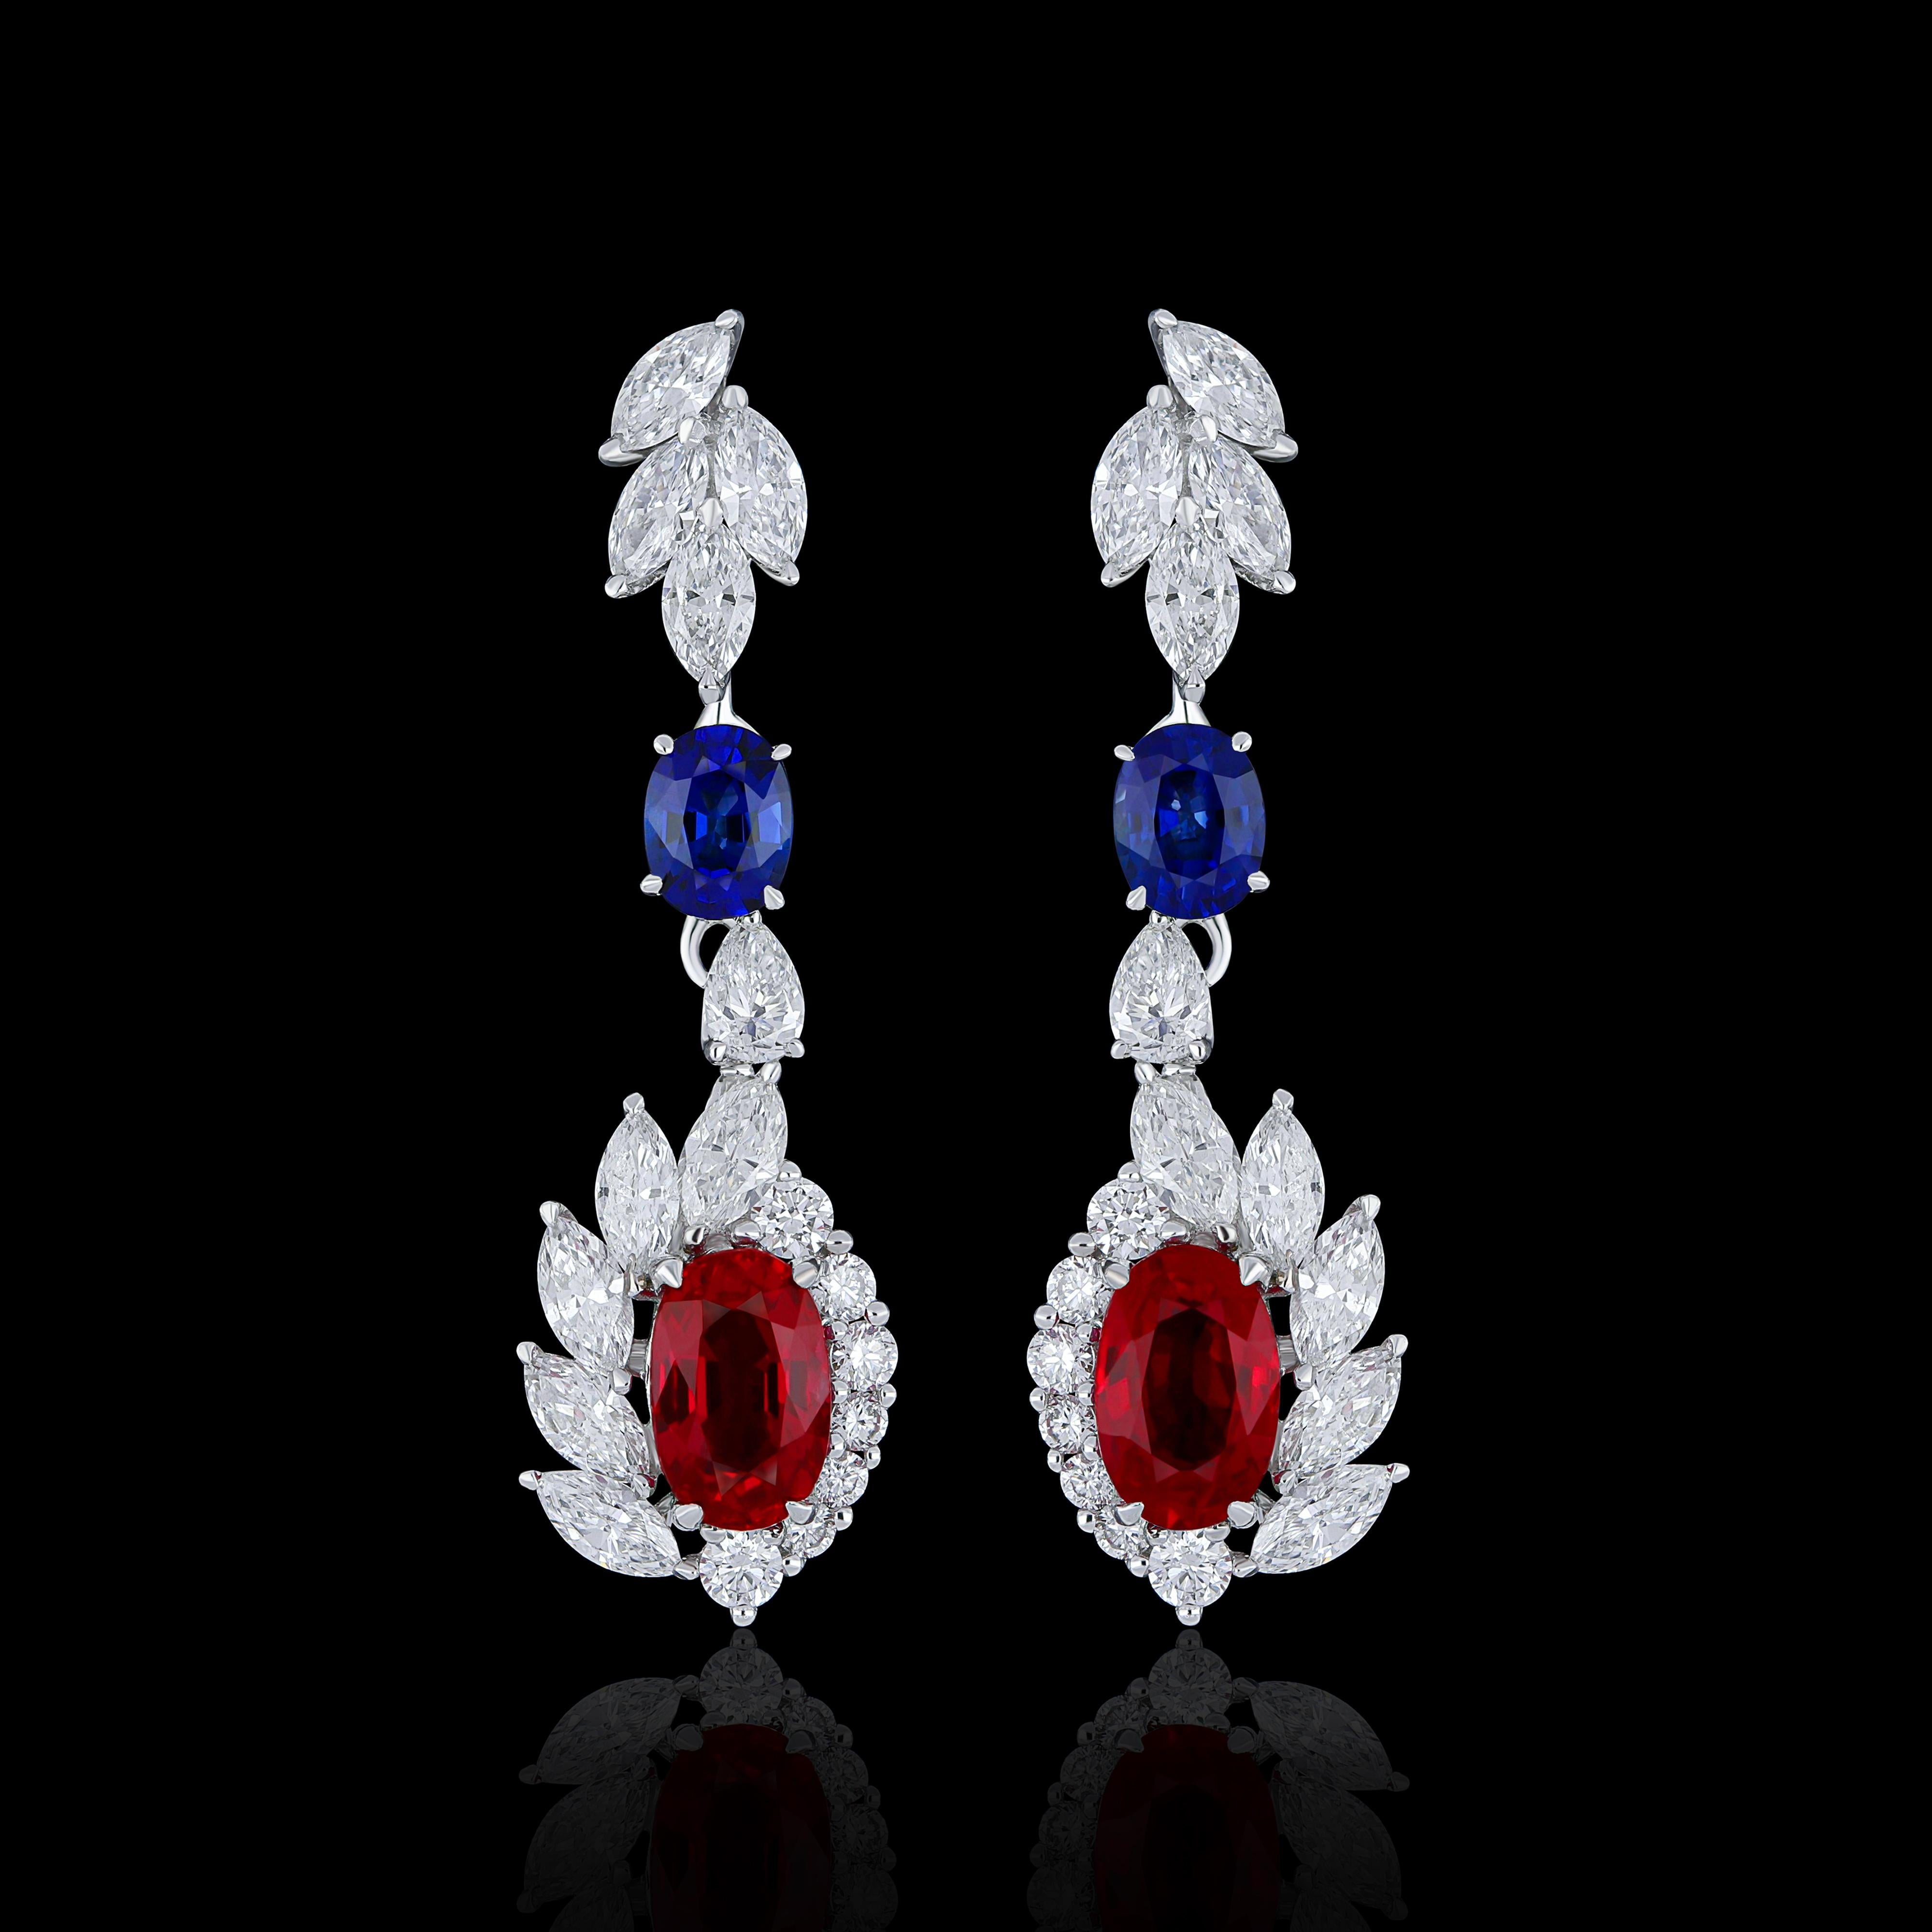 Elegant and exquisitely detailed 18 Karat White Gold Earring, center set with 1.26Cts .Oval Shape Vibrant Red Ruby, and Royal Blue Sapphire weighing approx. 0.51Cts accented with micro pave set Diamonds, weighing approx. 1.35 Cts Beautifully Hand